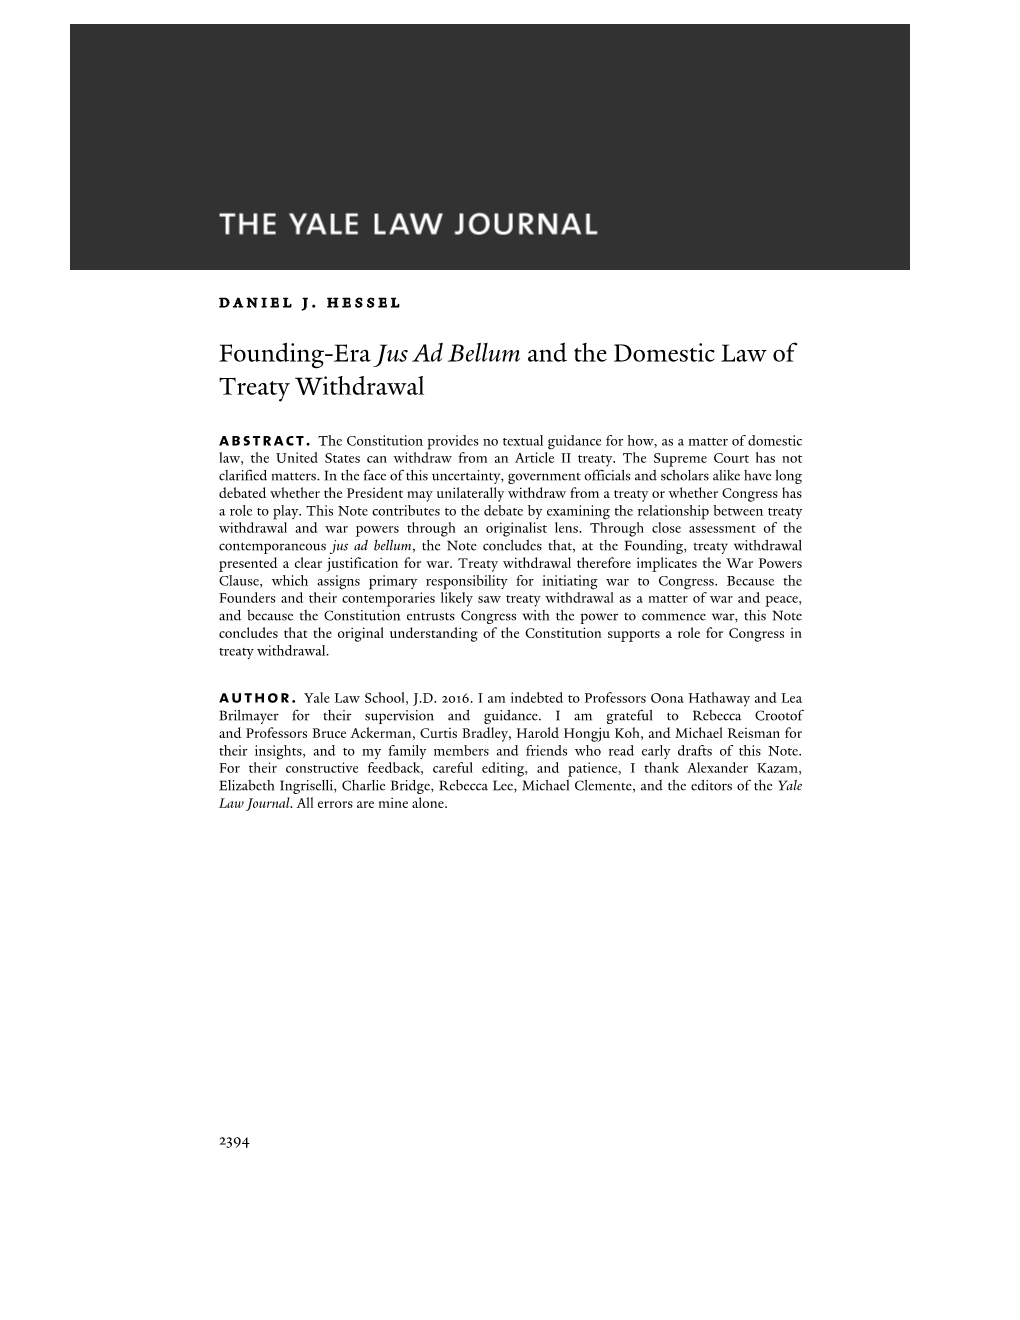 Founding-Era Jus Ad Bellum and the Domestic Law of Treaty Withdrawal Abstract